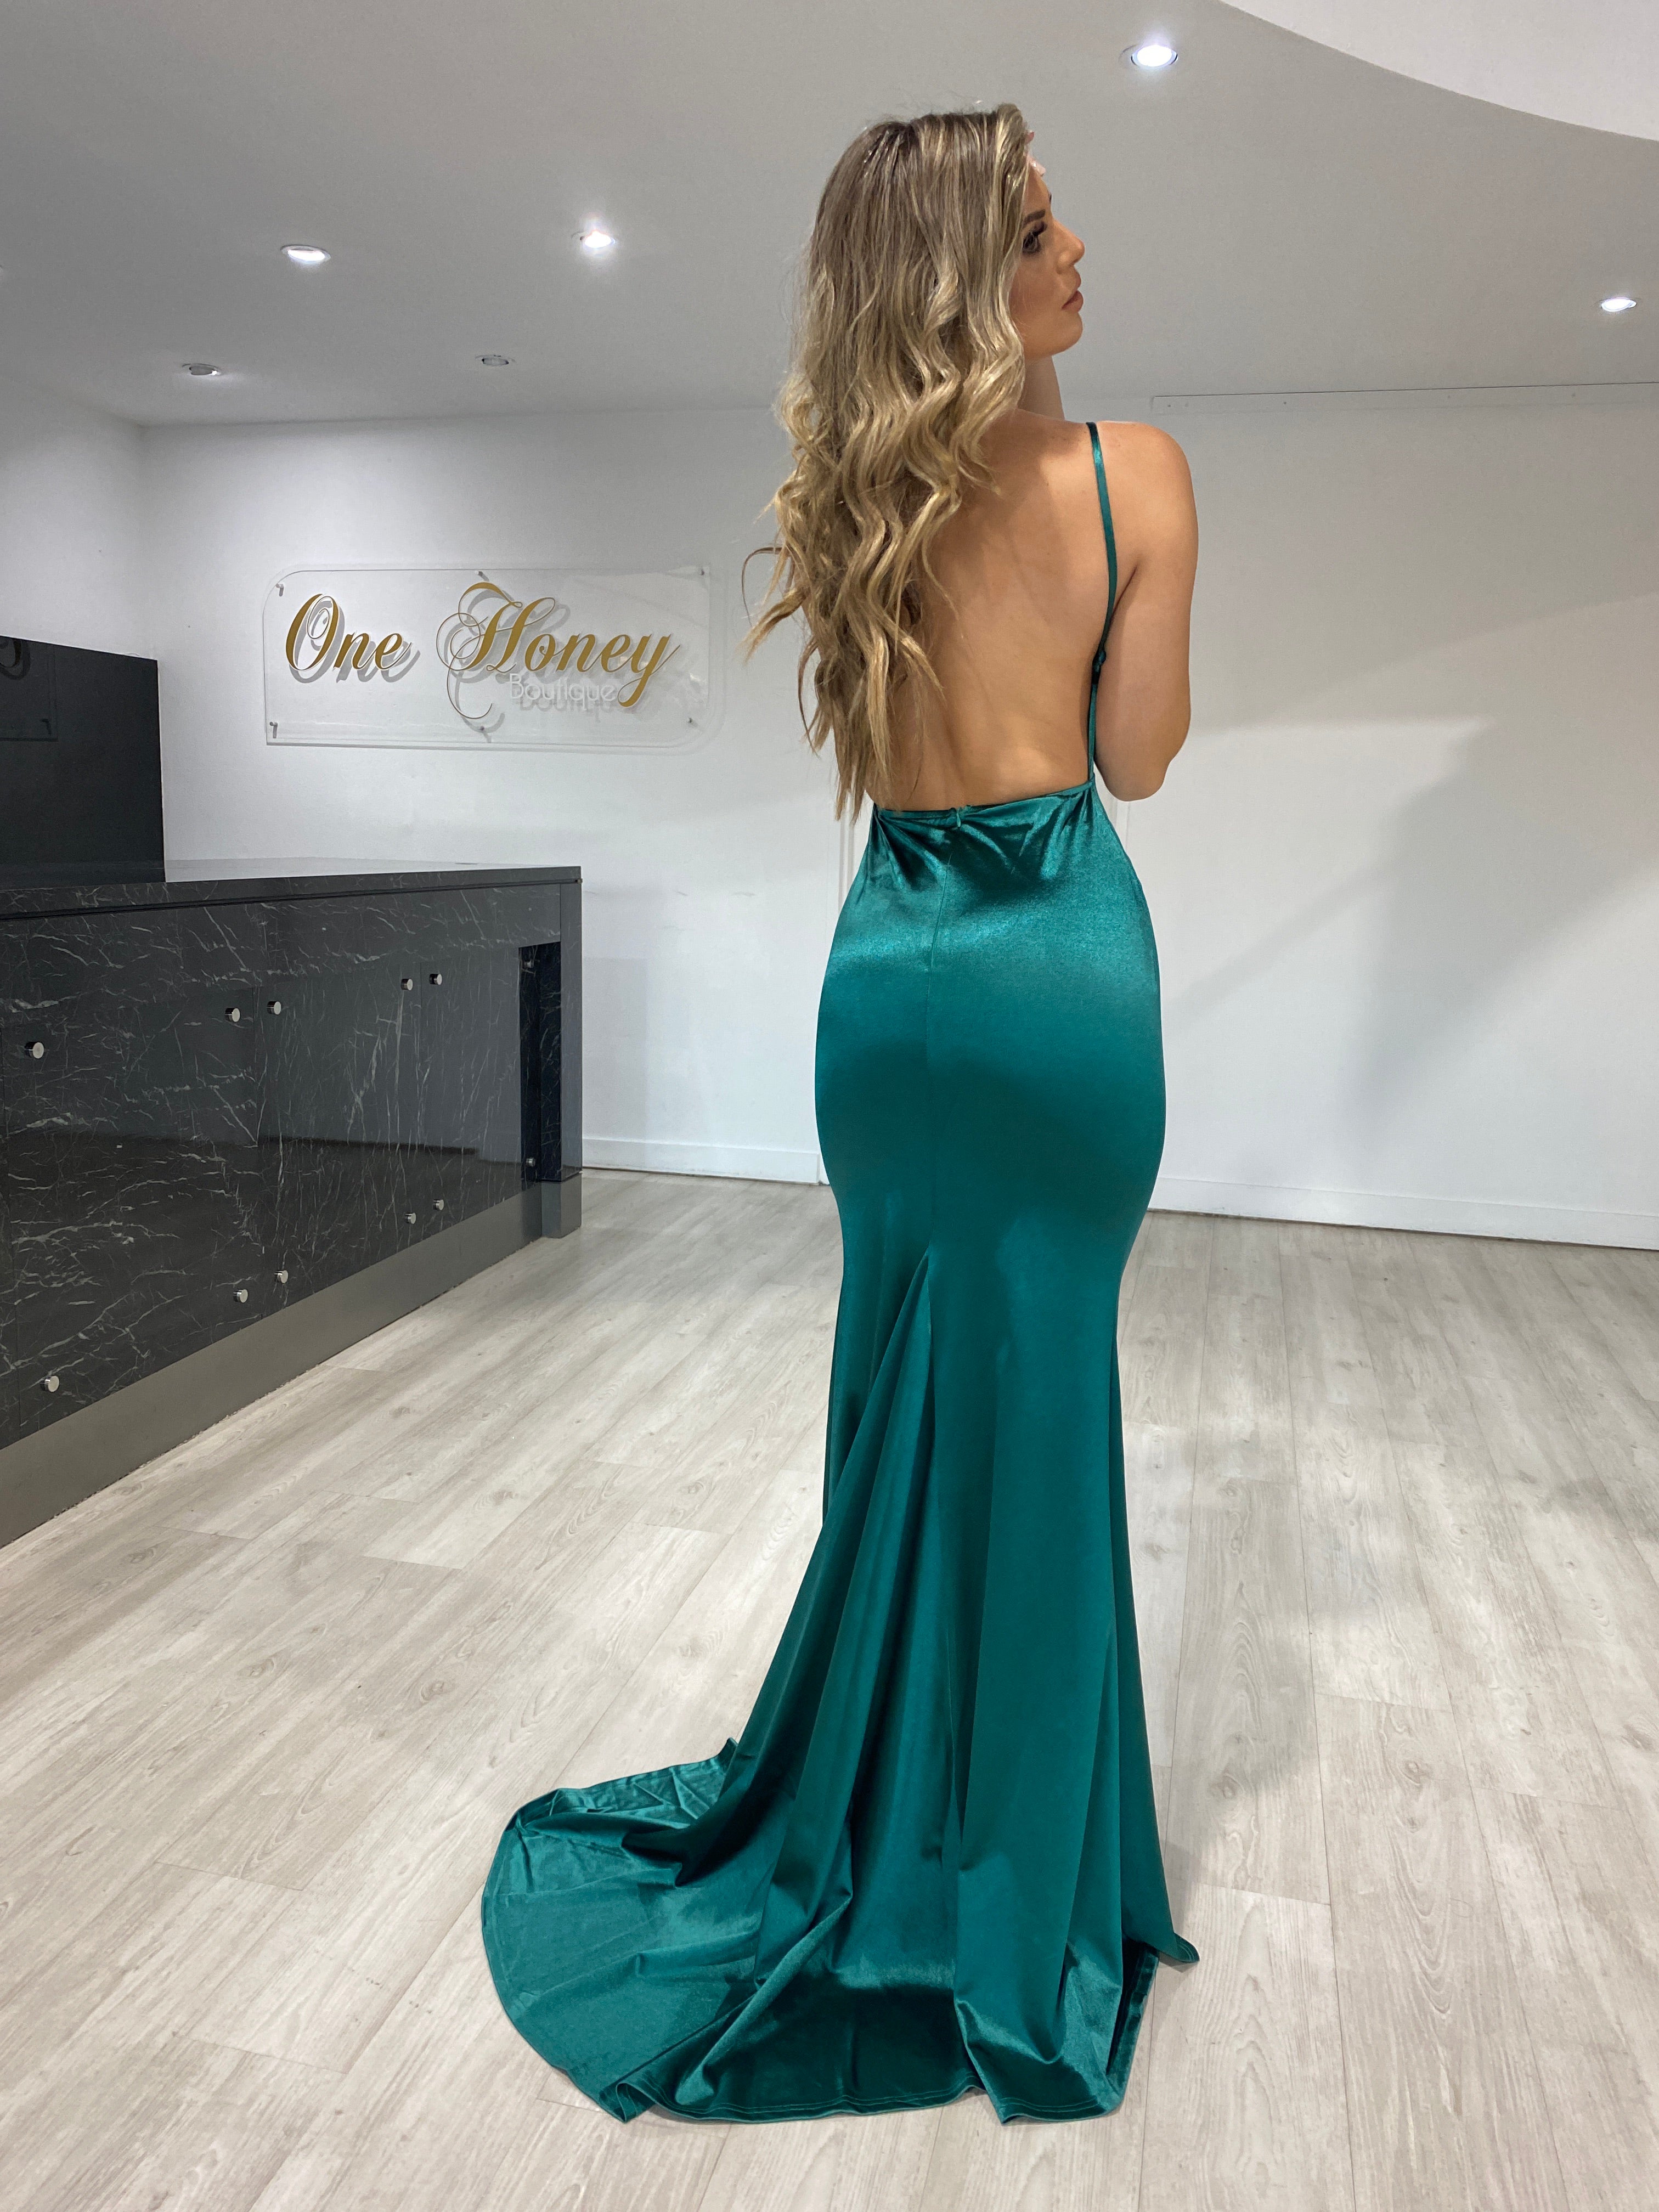 Honey Couture RILEY Emerald Green Low Back Mermaid Evening Gown Dress